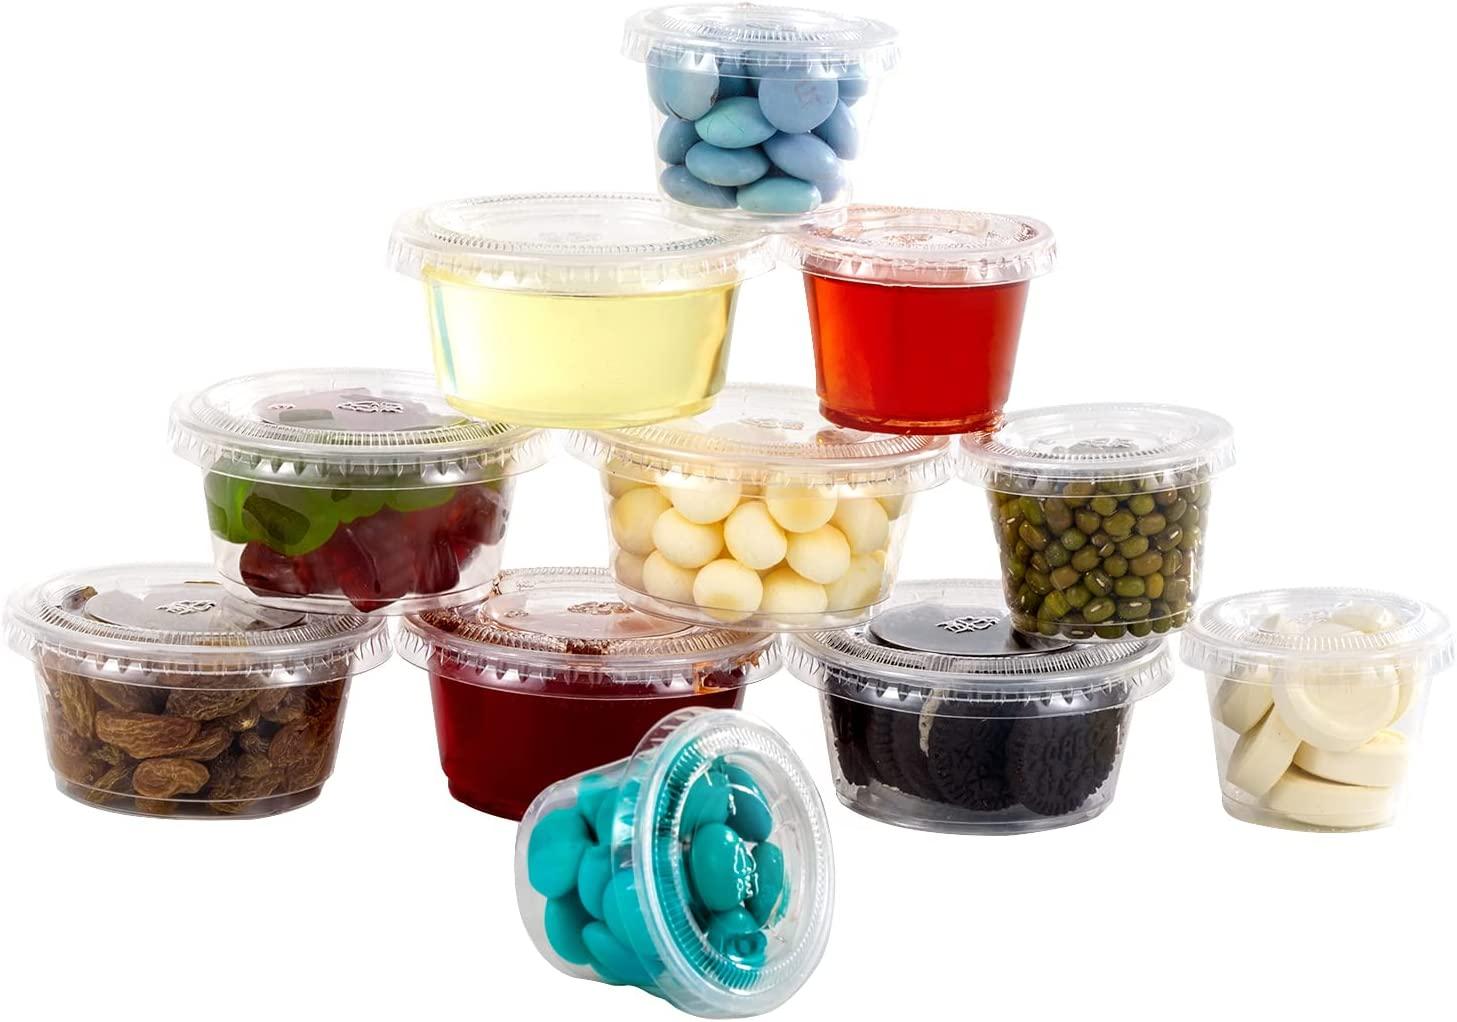 FICUCUSO 200 Sets - 1 oz Jello Shot Cups ,Condiment Containers with  Leak-Proof Lids, Disposable and Recyclable, Condiment Cups with Lids for  Sauces, Souffle, Food Samples, Pills and More. 1oz-200 sets with lids